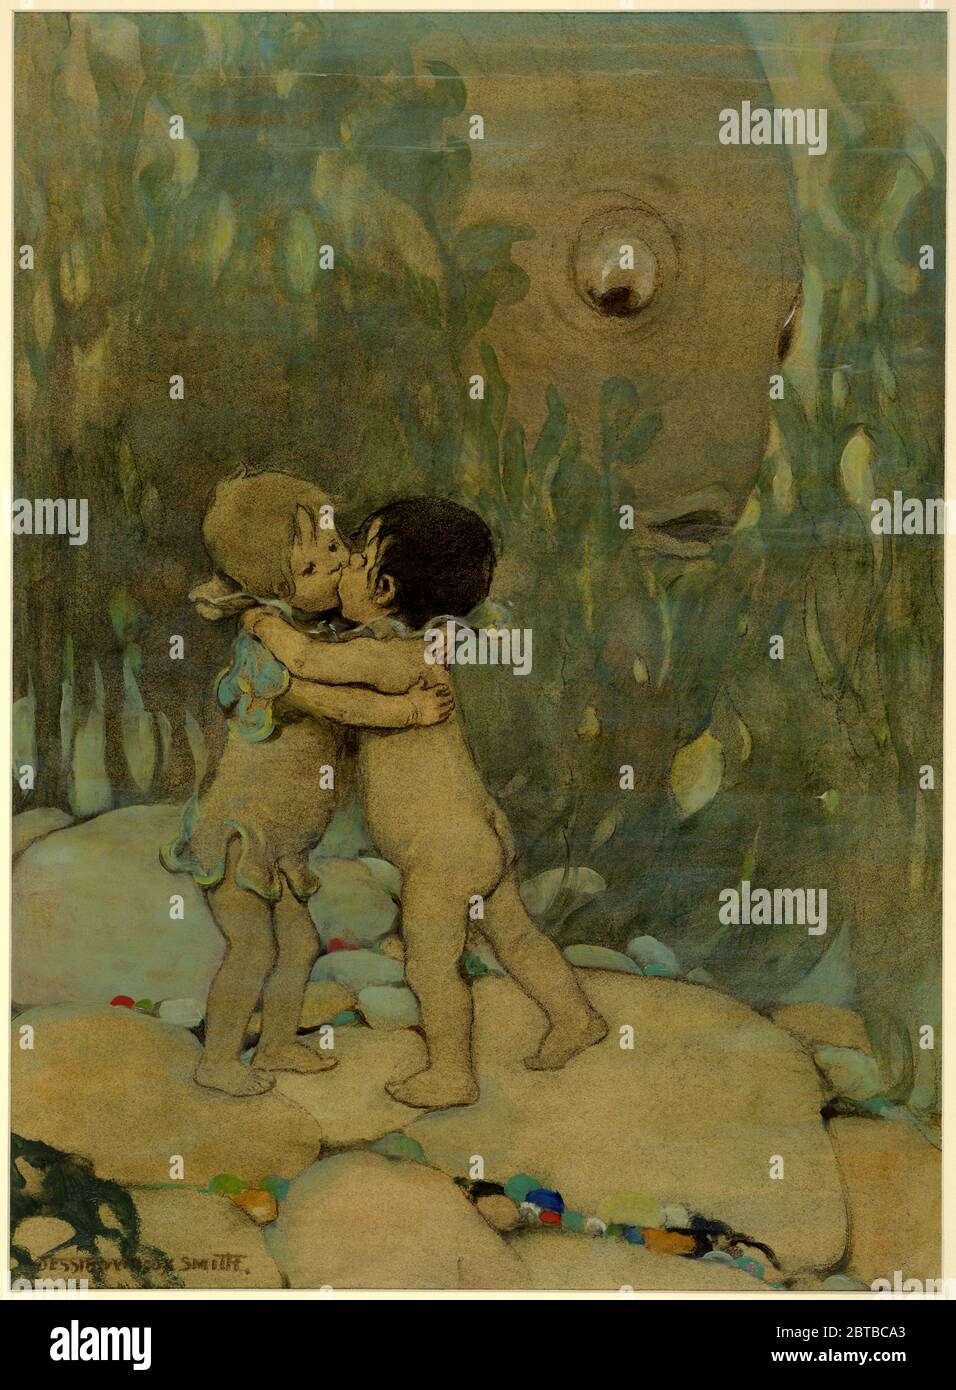 1916 , USA : The british CHARLES KINGSLEY ( 1819 - 1875 ), priest , social reformer, historian and novelist . Friend of Charles Darwin . Uncle of traveller and scientist Mary Kingsley .Illustration by Jessie Willcox SMITH ( 1863 - 1935 ) for book THE WATER BABIES (1916), NY, Dodd, Mead & co, artwork by - ILLUSTRATION - ILLUSTRAZIONE - ARTS - ARTE - SCRITTORE - WRITER - LETTERATURA - LITERATURE - WRITER - SCRITTORE - child - children - bambino - bambini - childhood - infanzia - kis - bacio - mare - sea --- ARCHIVIO GBB Stock Photo